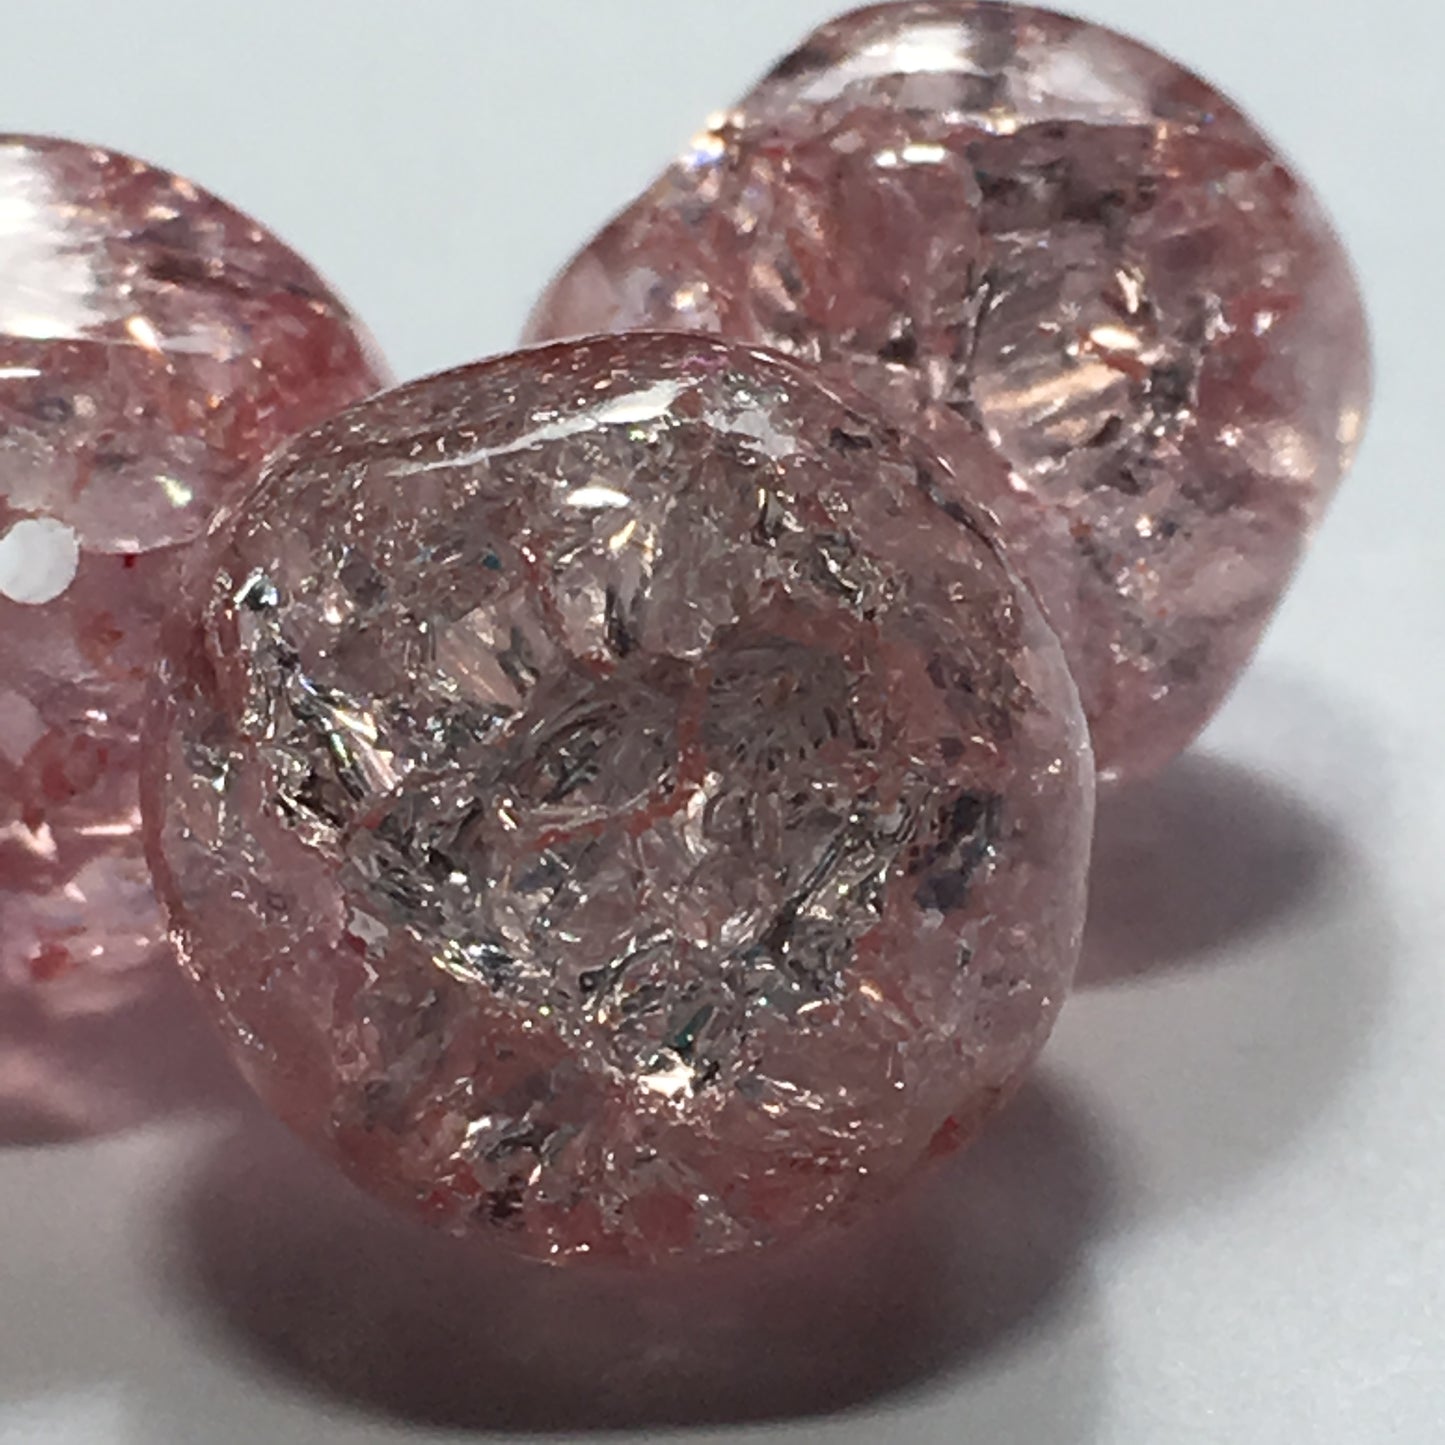 Pink Round Faceted Crackle Glass Beads, 15 mm, 3 Beads